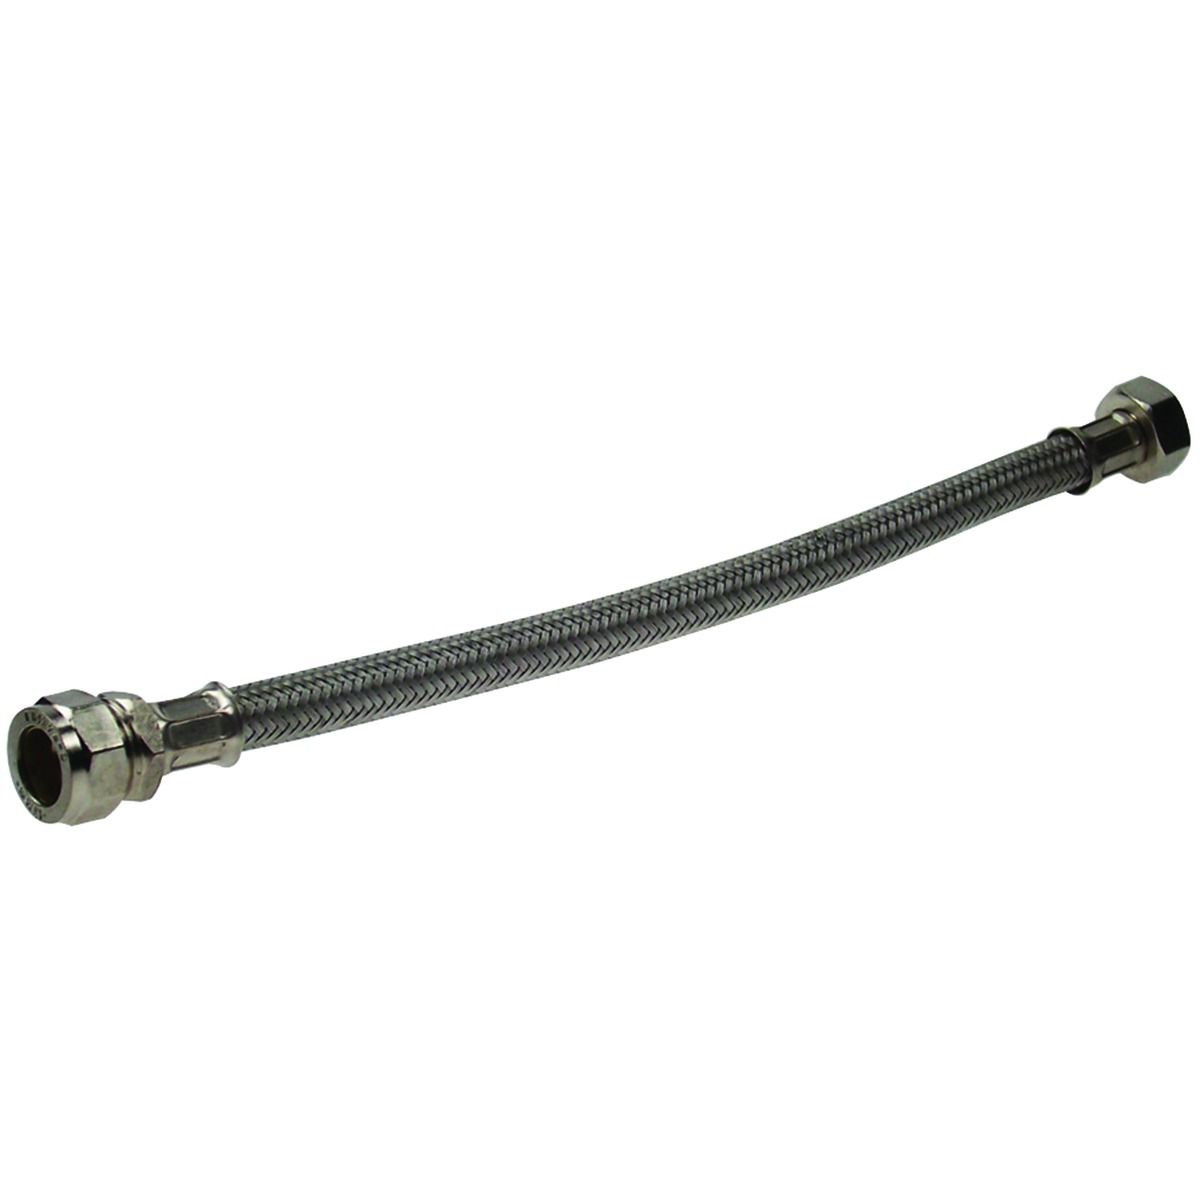 Image of Primaflow Flexible Tap Connector - 15 X 12 X 300mm